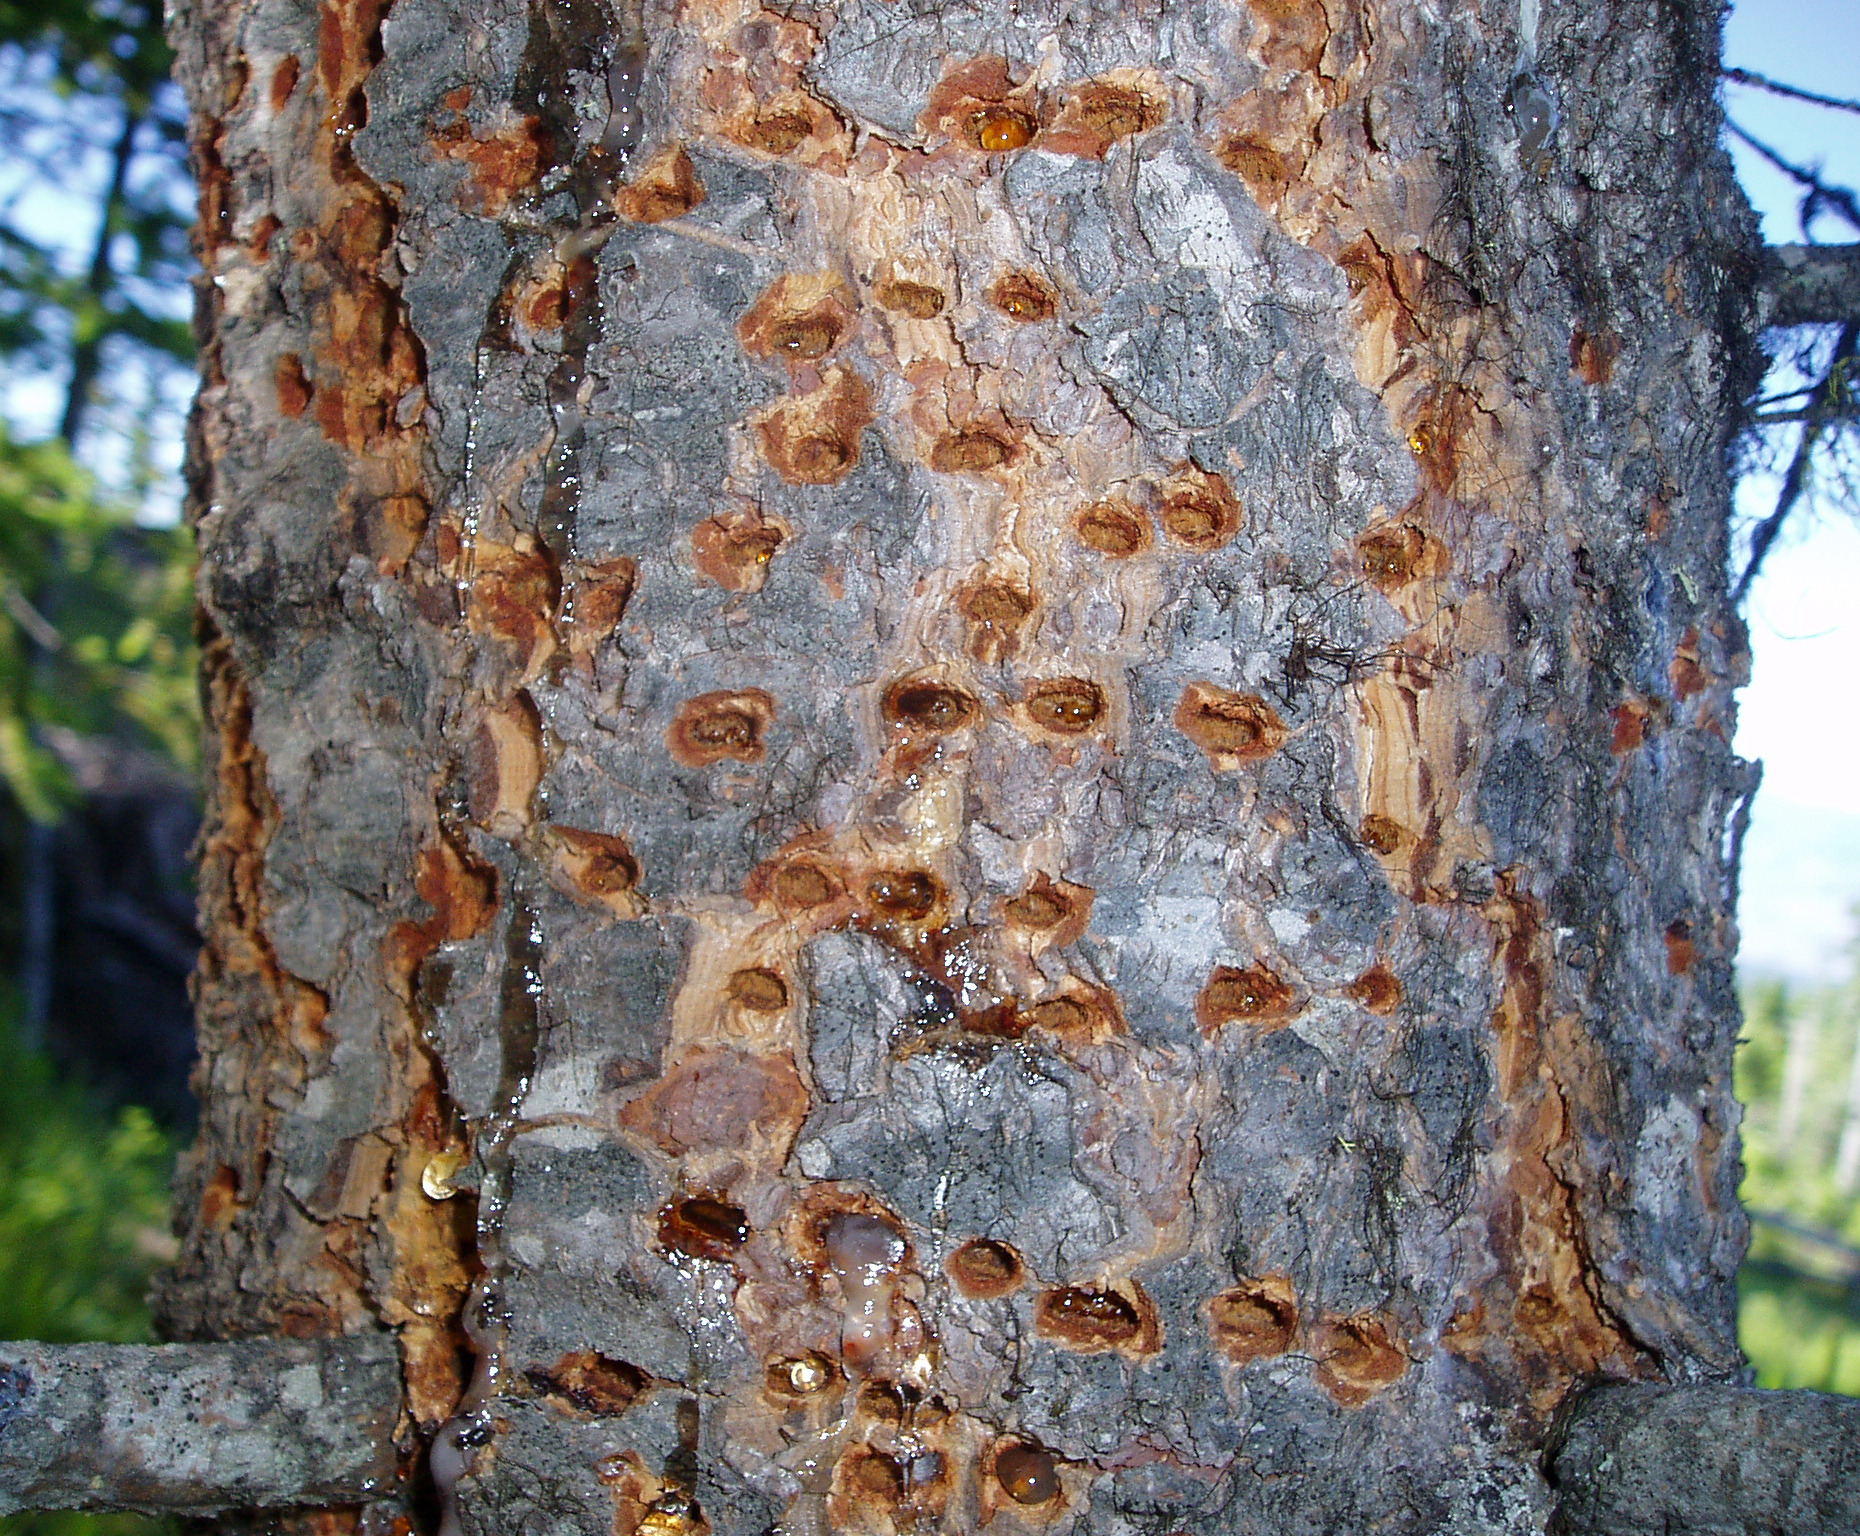 Williamson's sapsuckers drill holes in western larch, Douglas fir and pine trees to extract sap. 